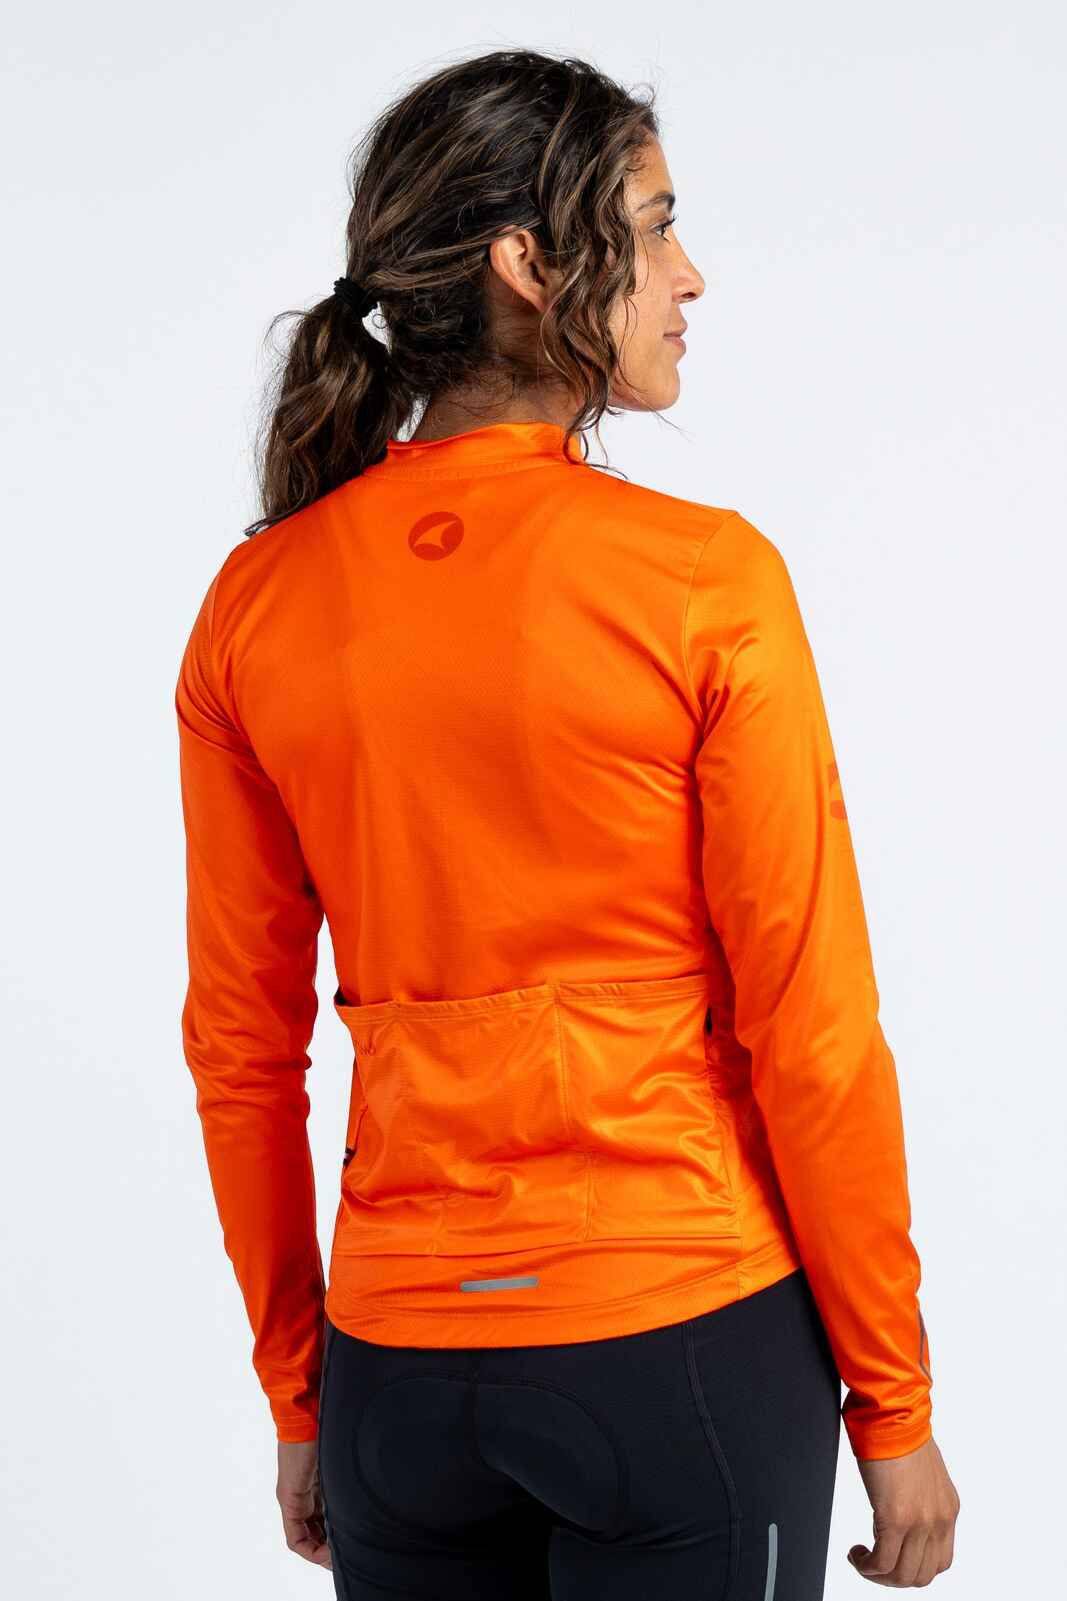 Women's Red/Orange Long Sleeve Cycling Jersey - Ascent Back View